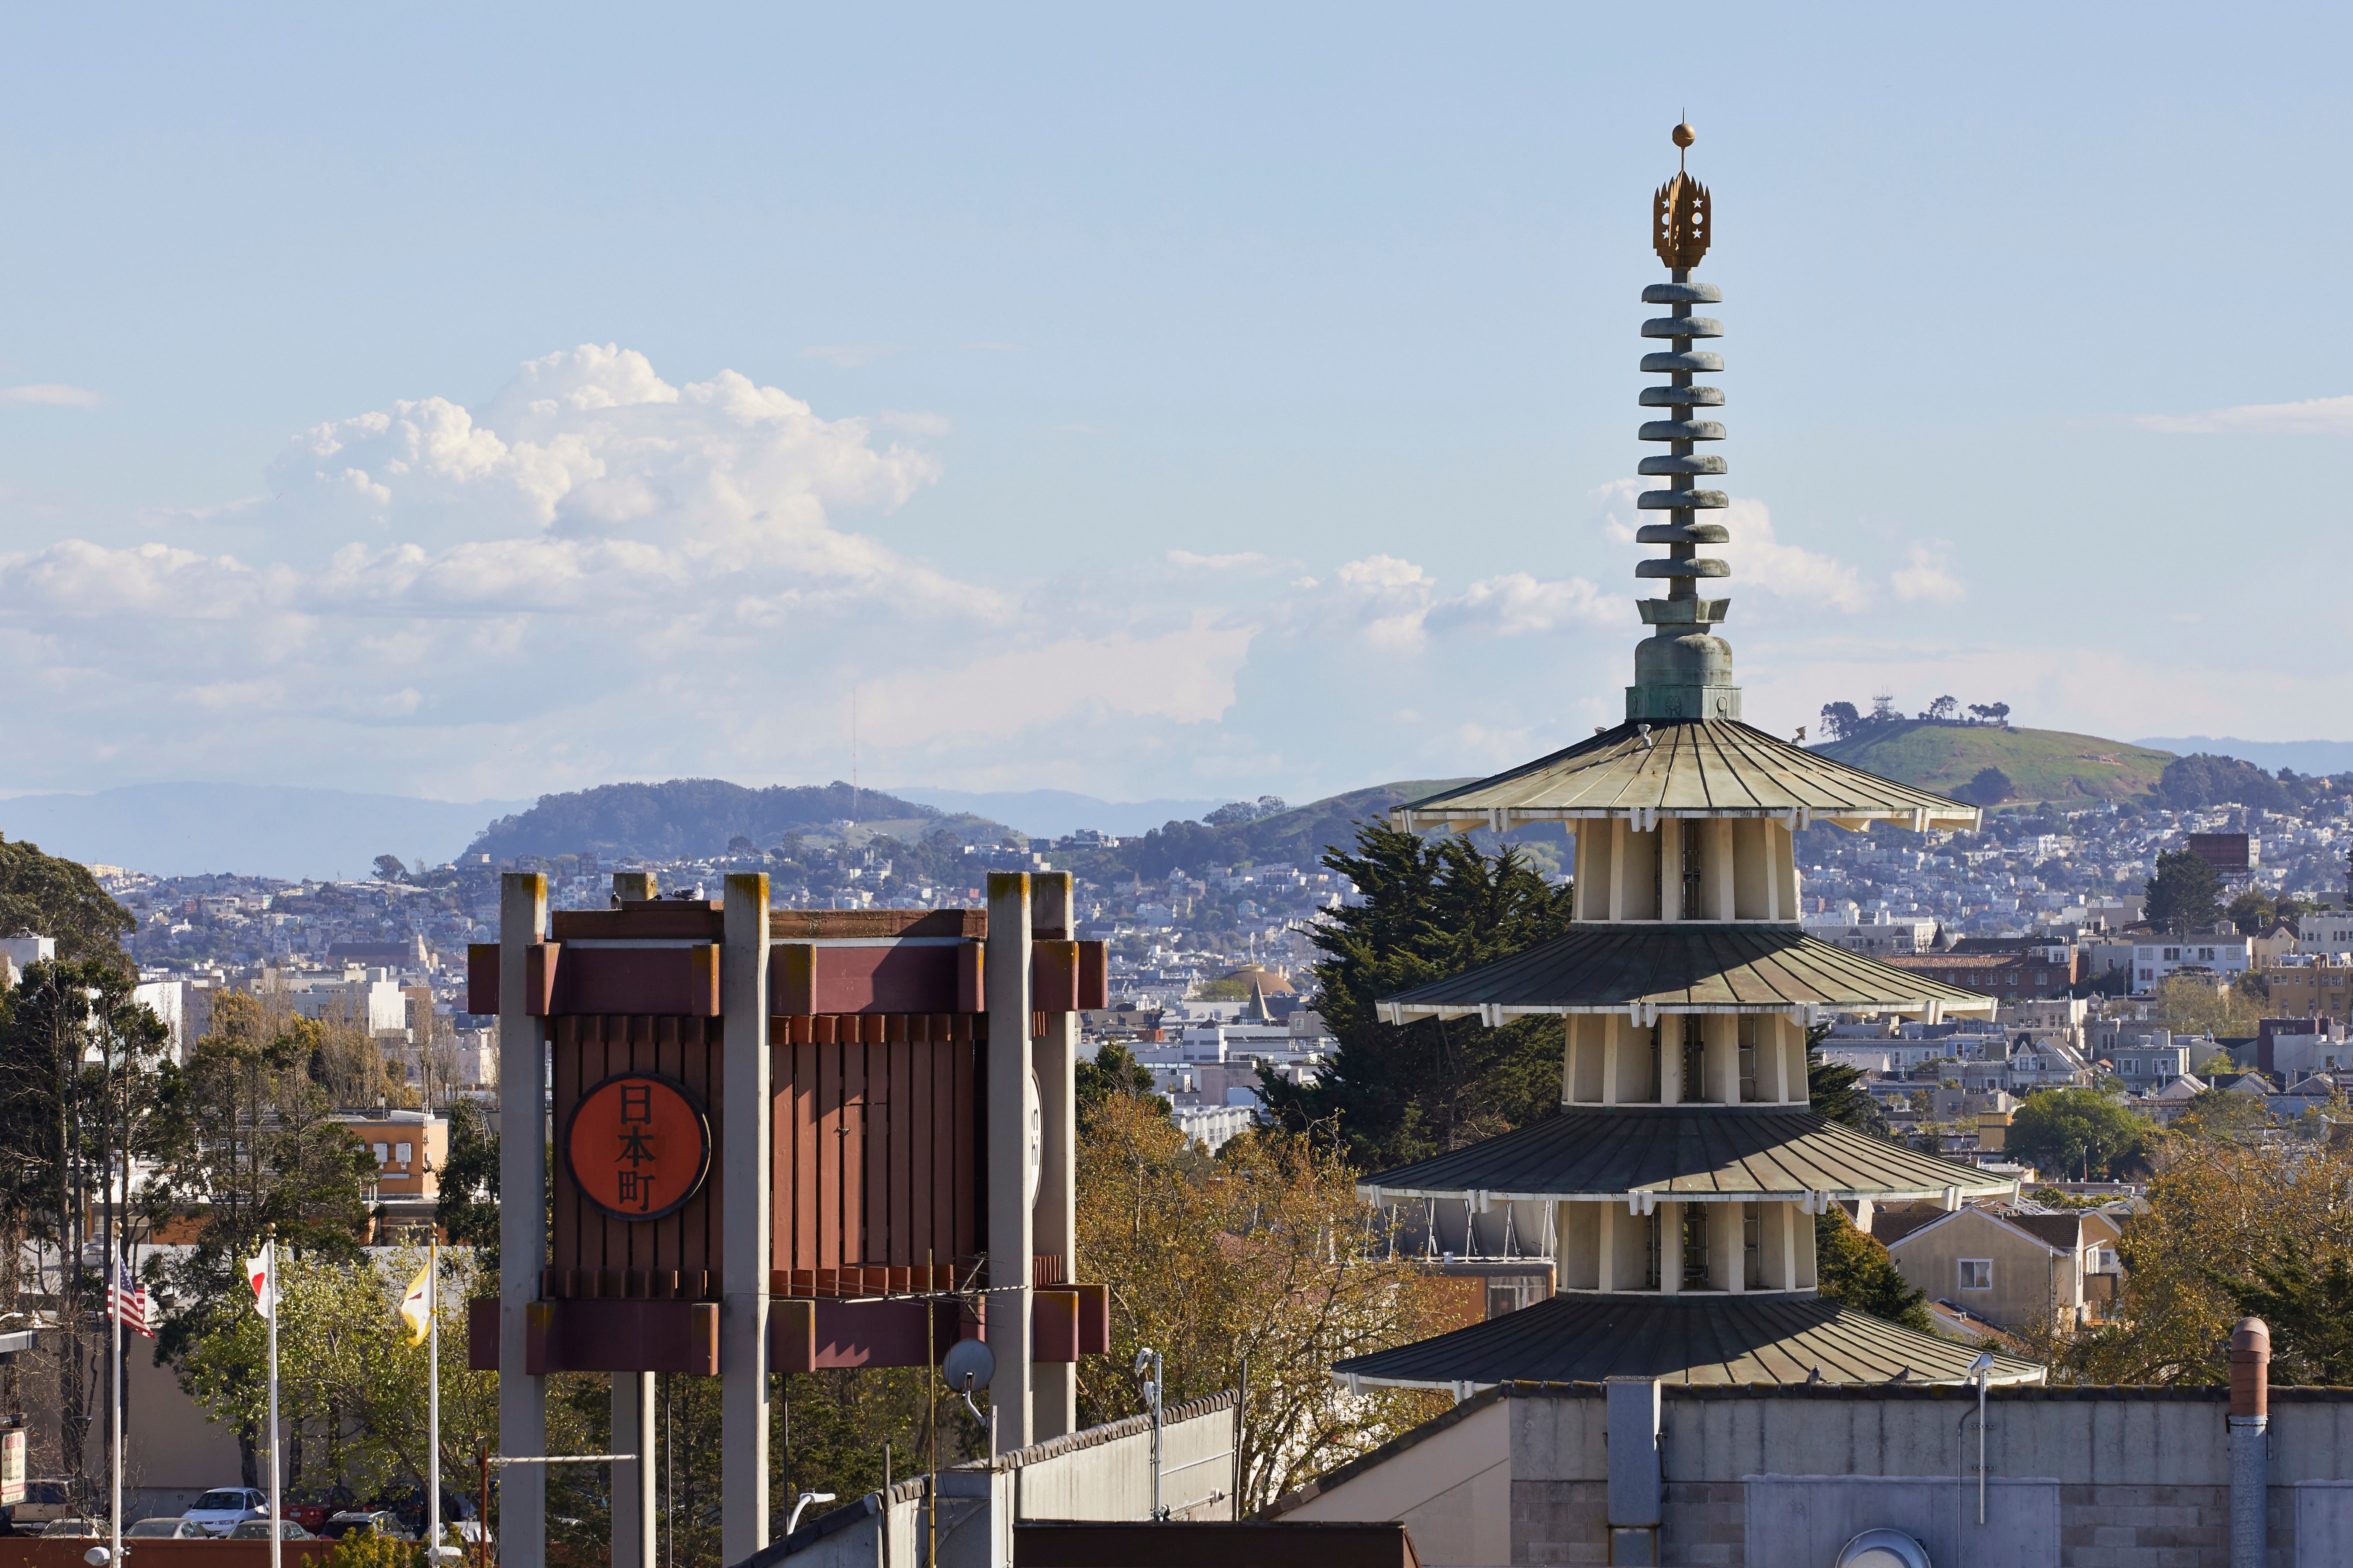 At the centre of Japantown is the Peace Pagoda, reaching 100 feet into the air